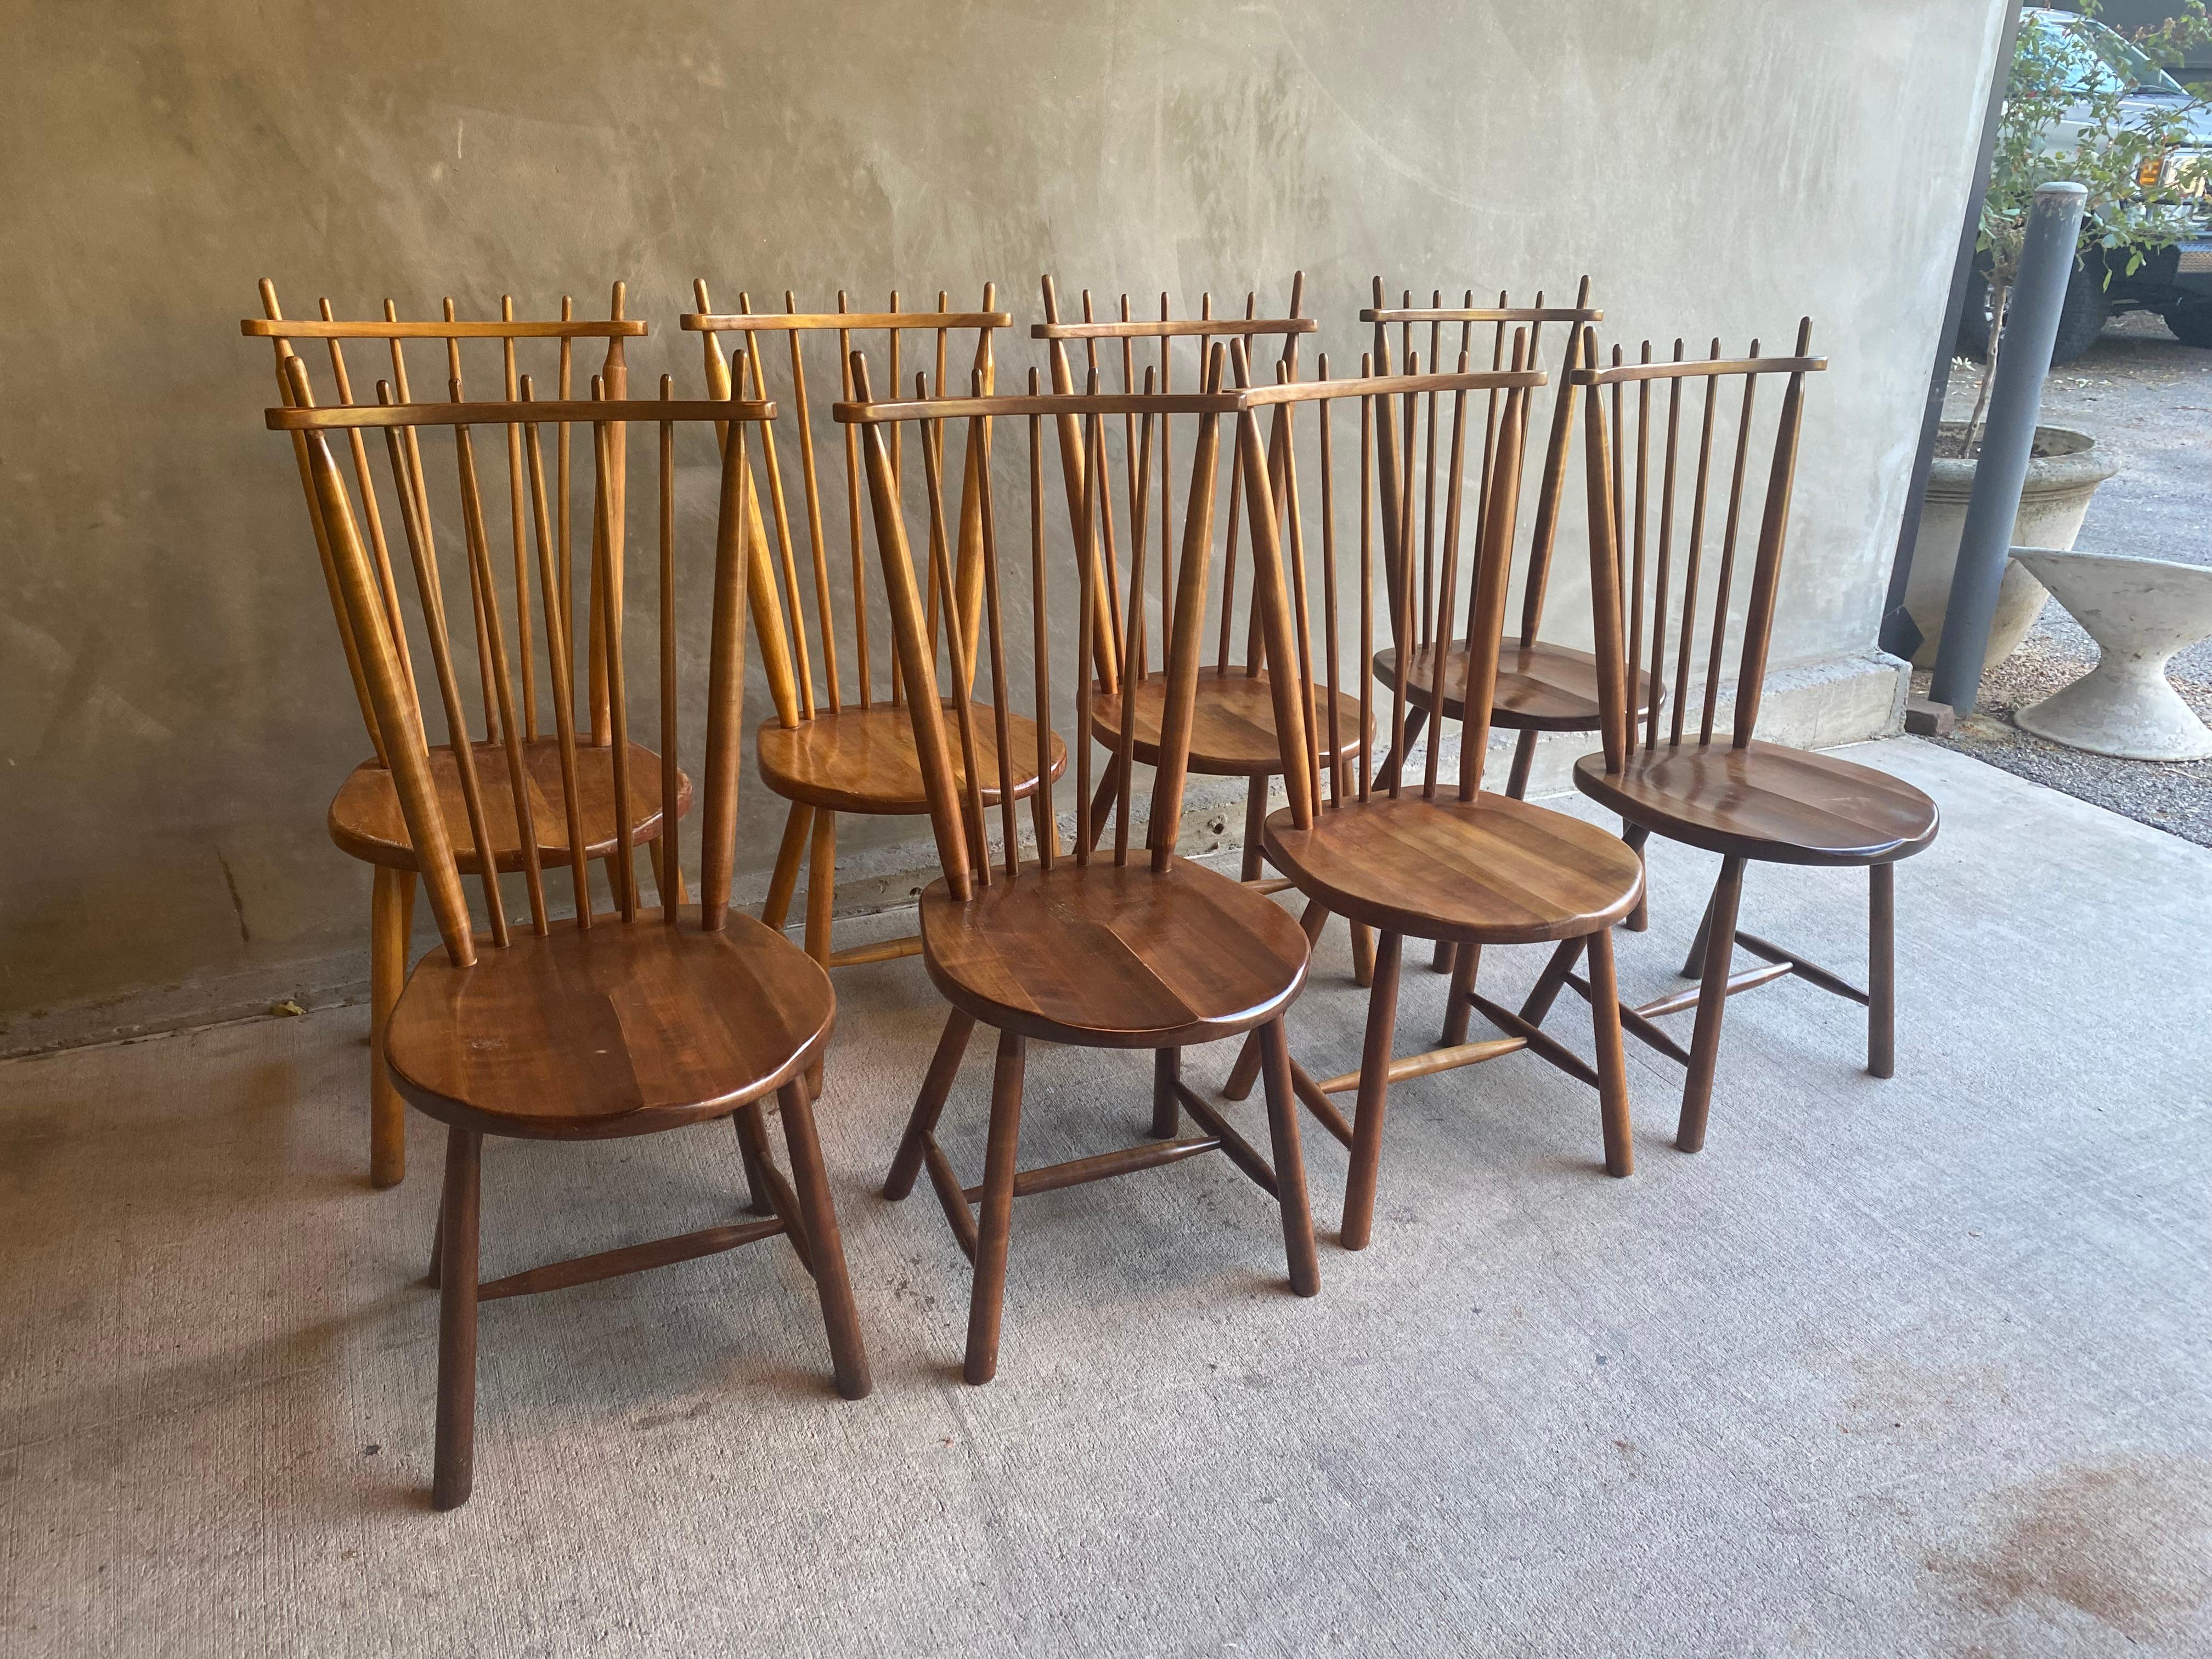 Dutch dining chairs constructed of solid hardwood in a rich range of cognac to brown reflect the mid-century interpretation of a Windsor chair.  Curved seat and spindle back with just the right slant make a very comfortable dining chair.  By De Ster